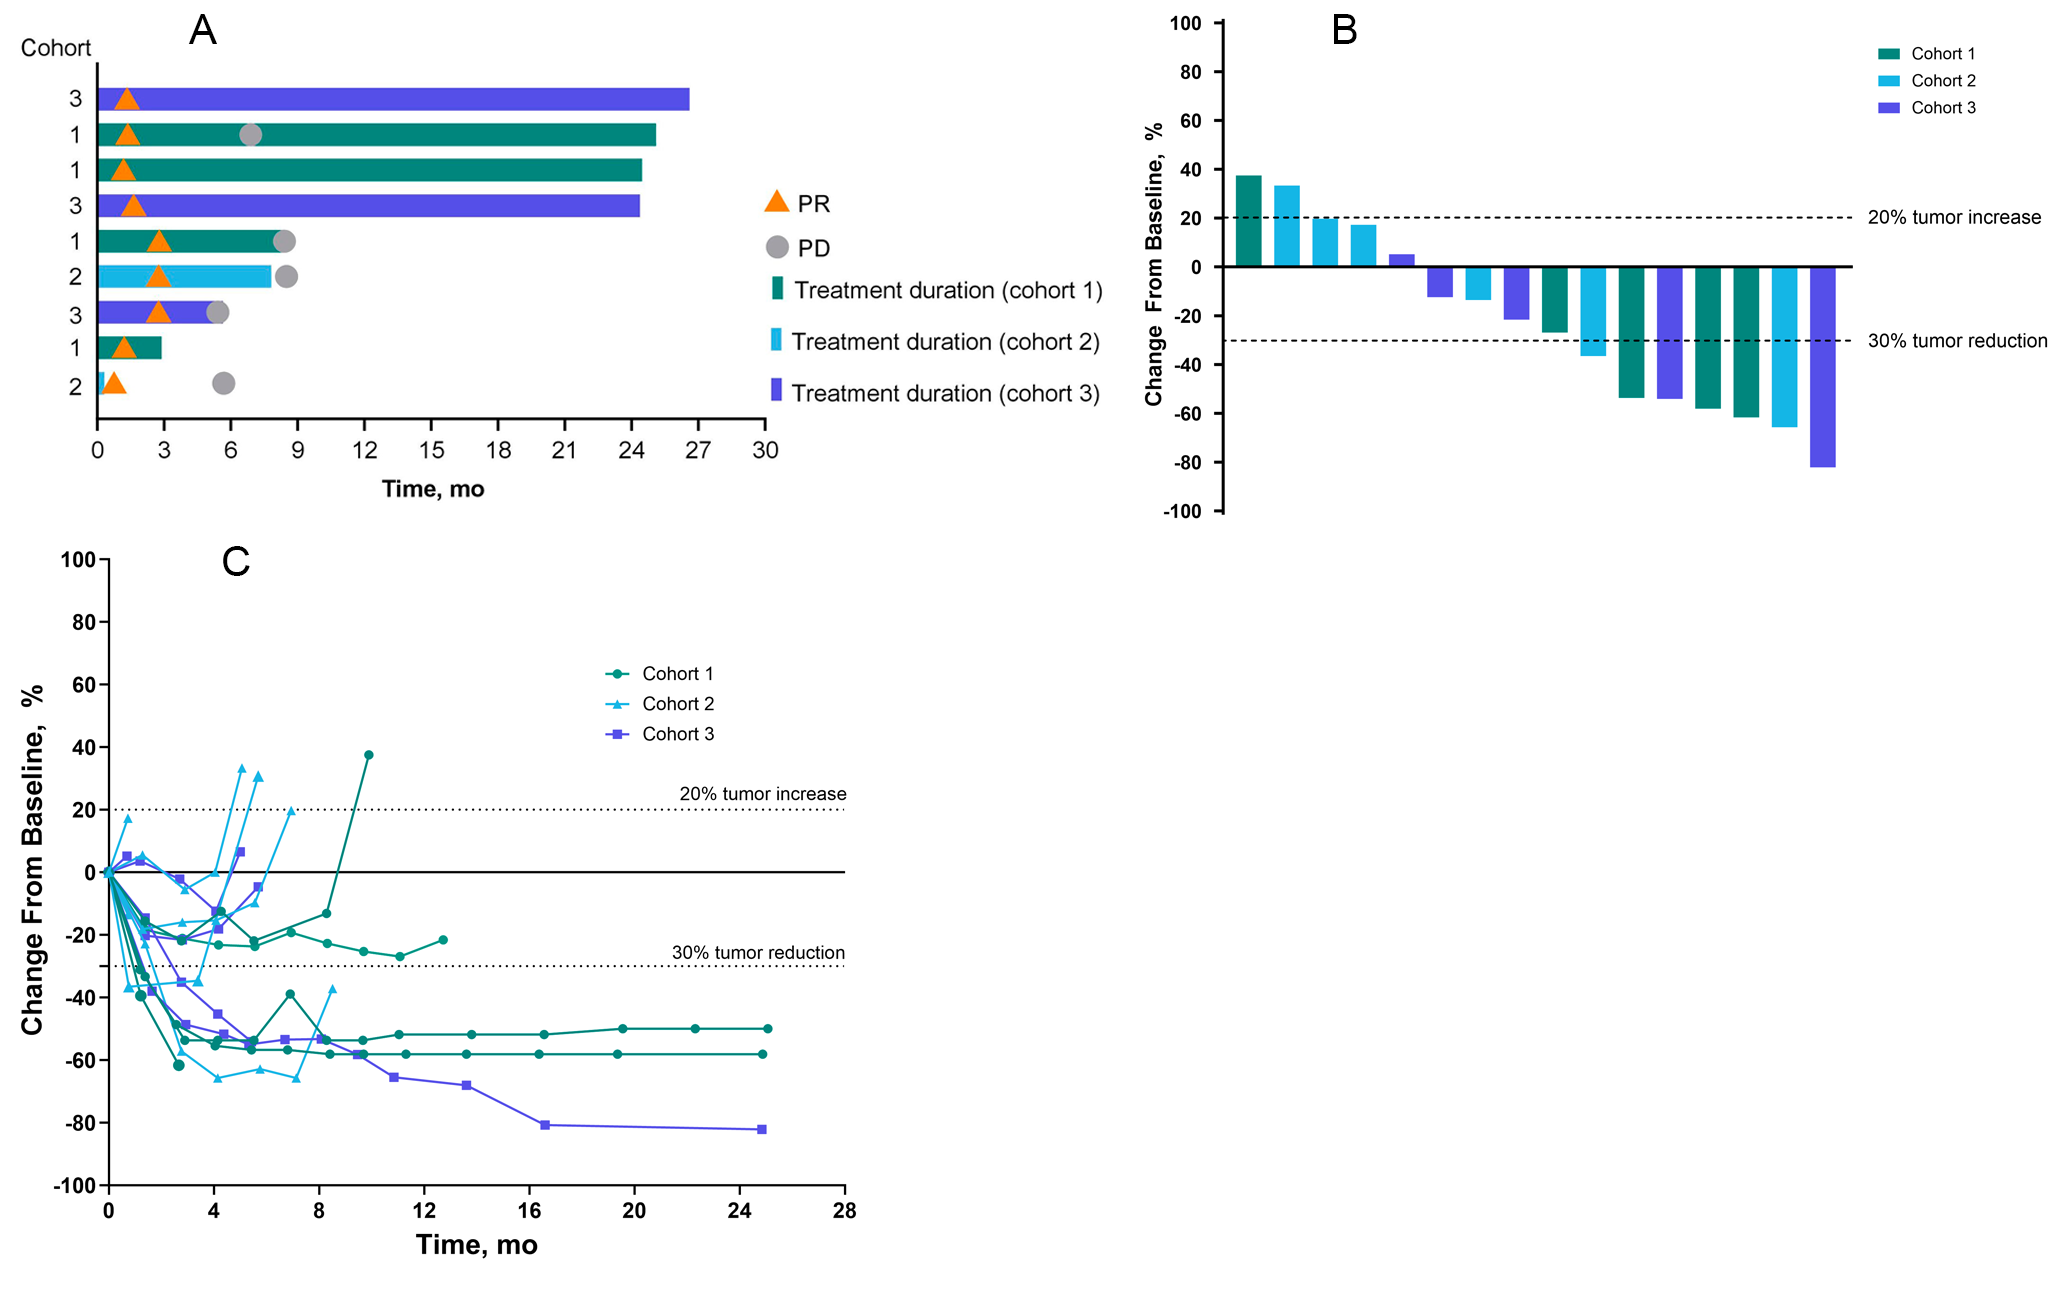 KEYNOTE-434 part B: A phase 1 study evaluating the combination of epacadostat, pembrolizumab, and chemotherapy in Japanese patients with previously untreated advanced non–small-cell lung cancer